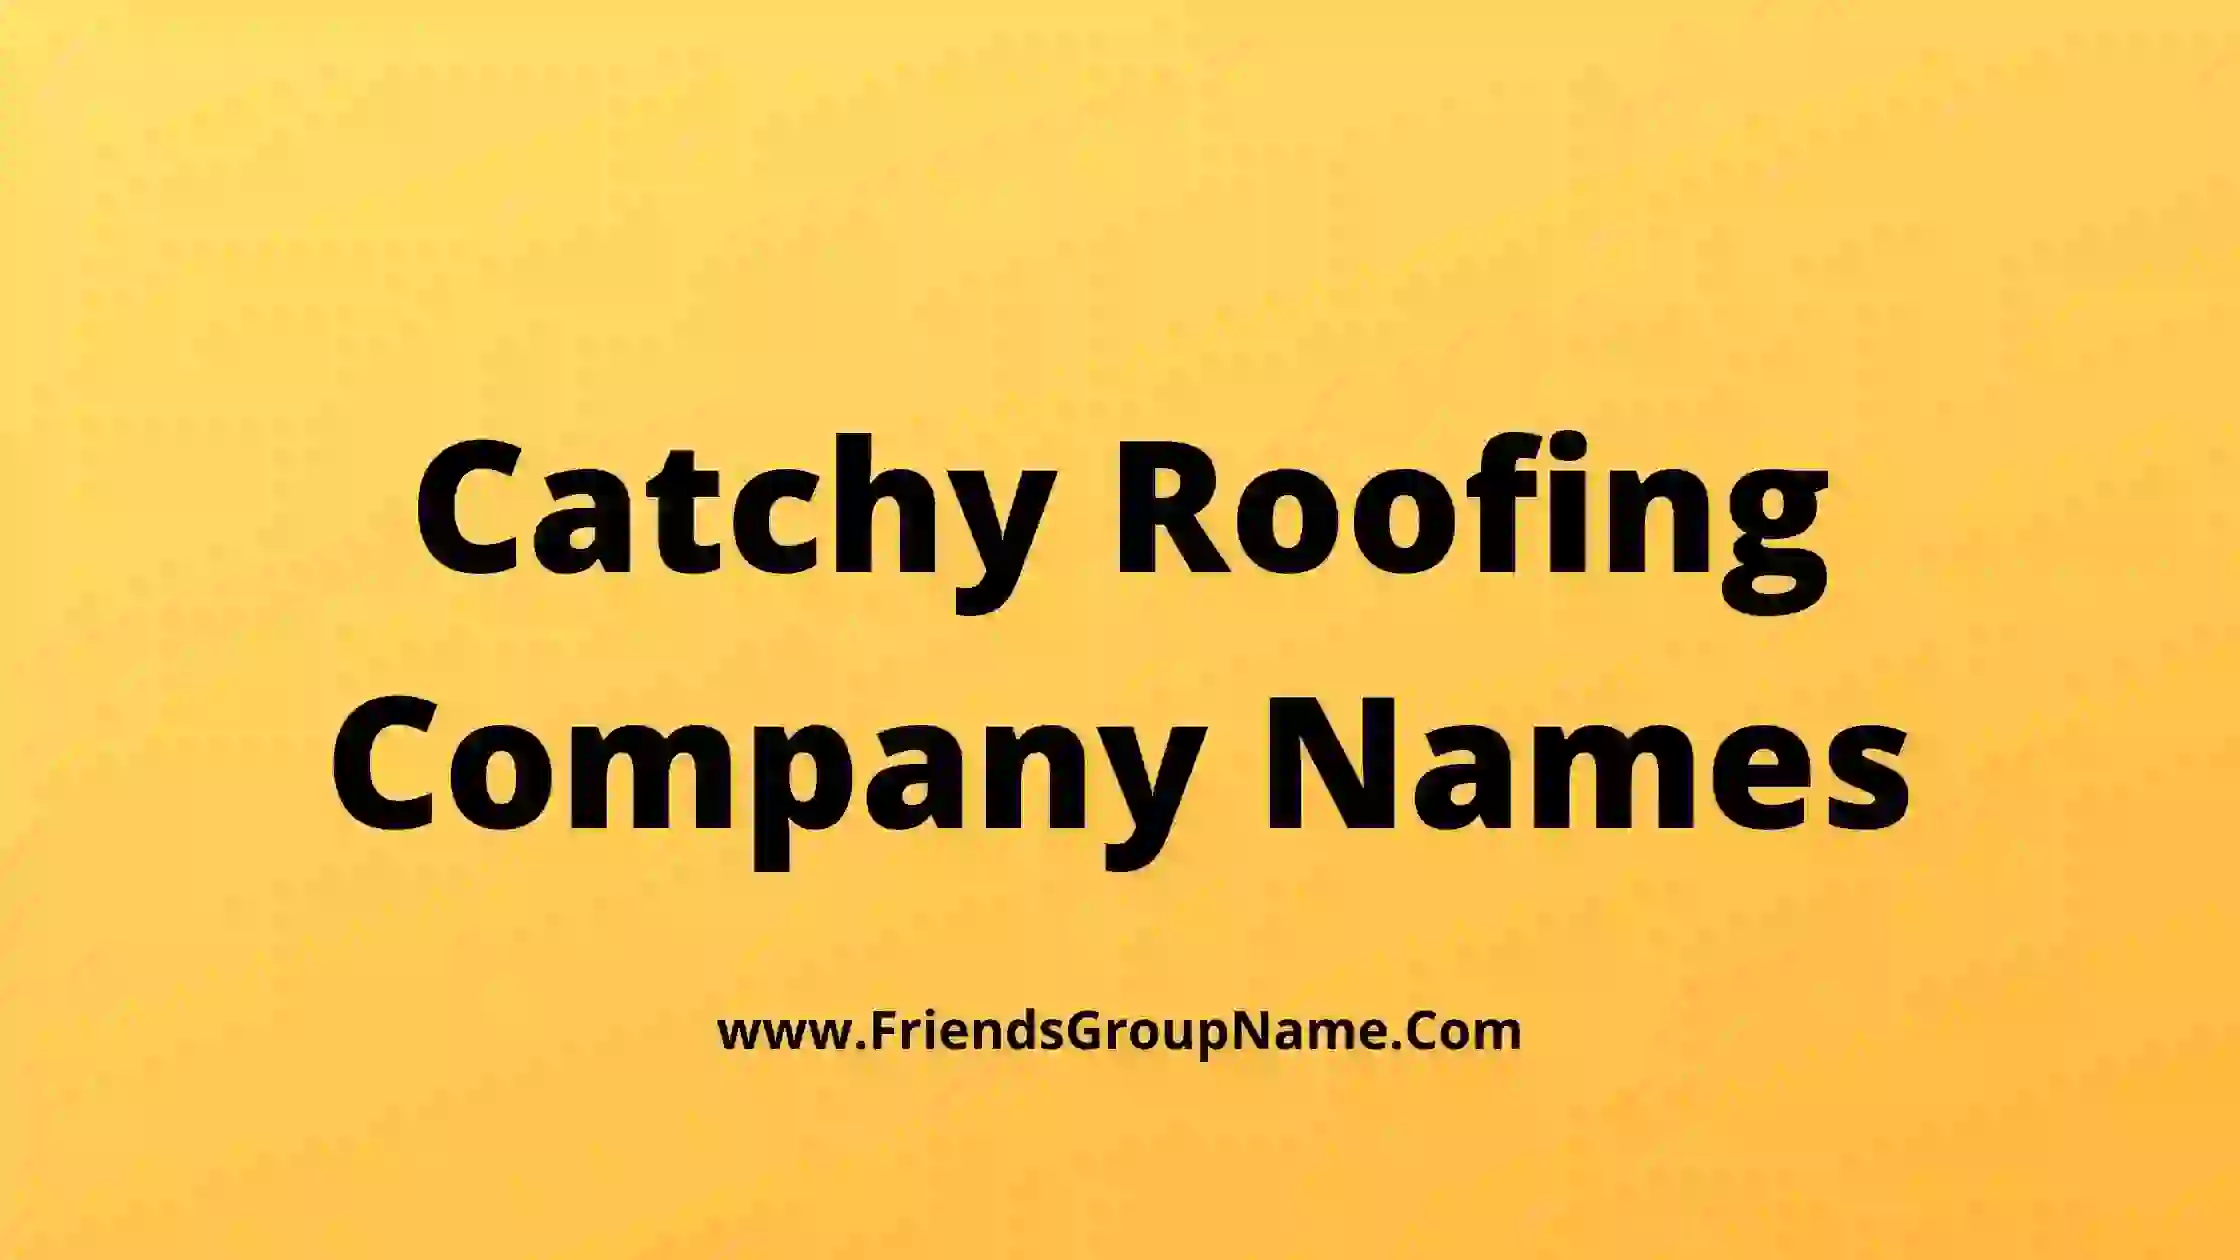 Catchy Roofing Company Names